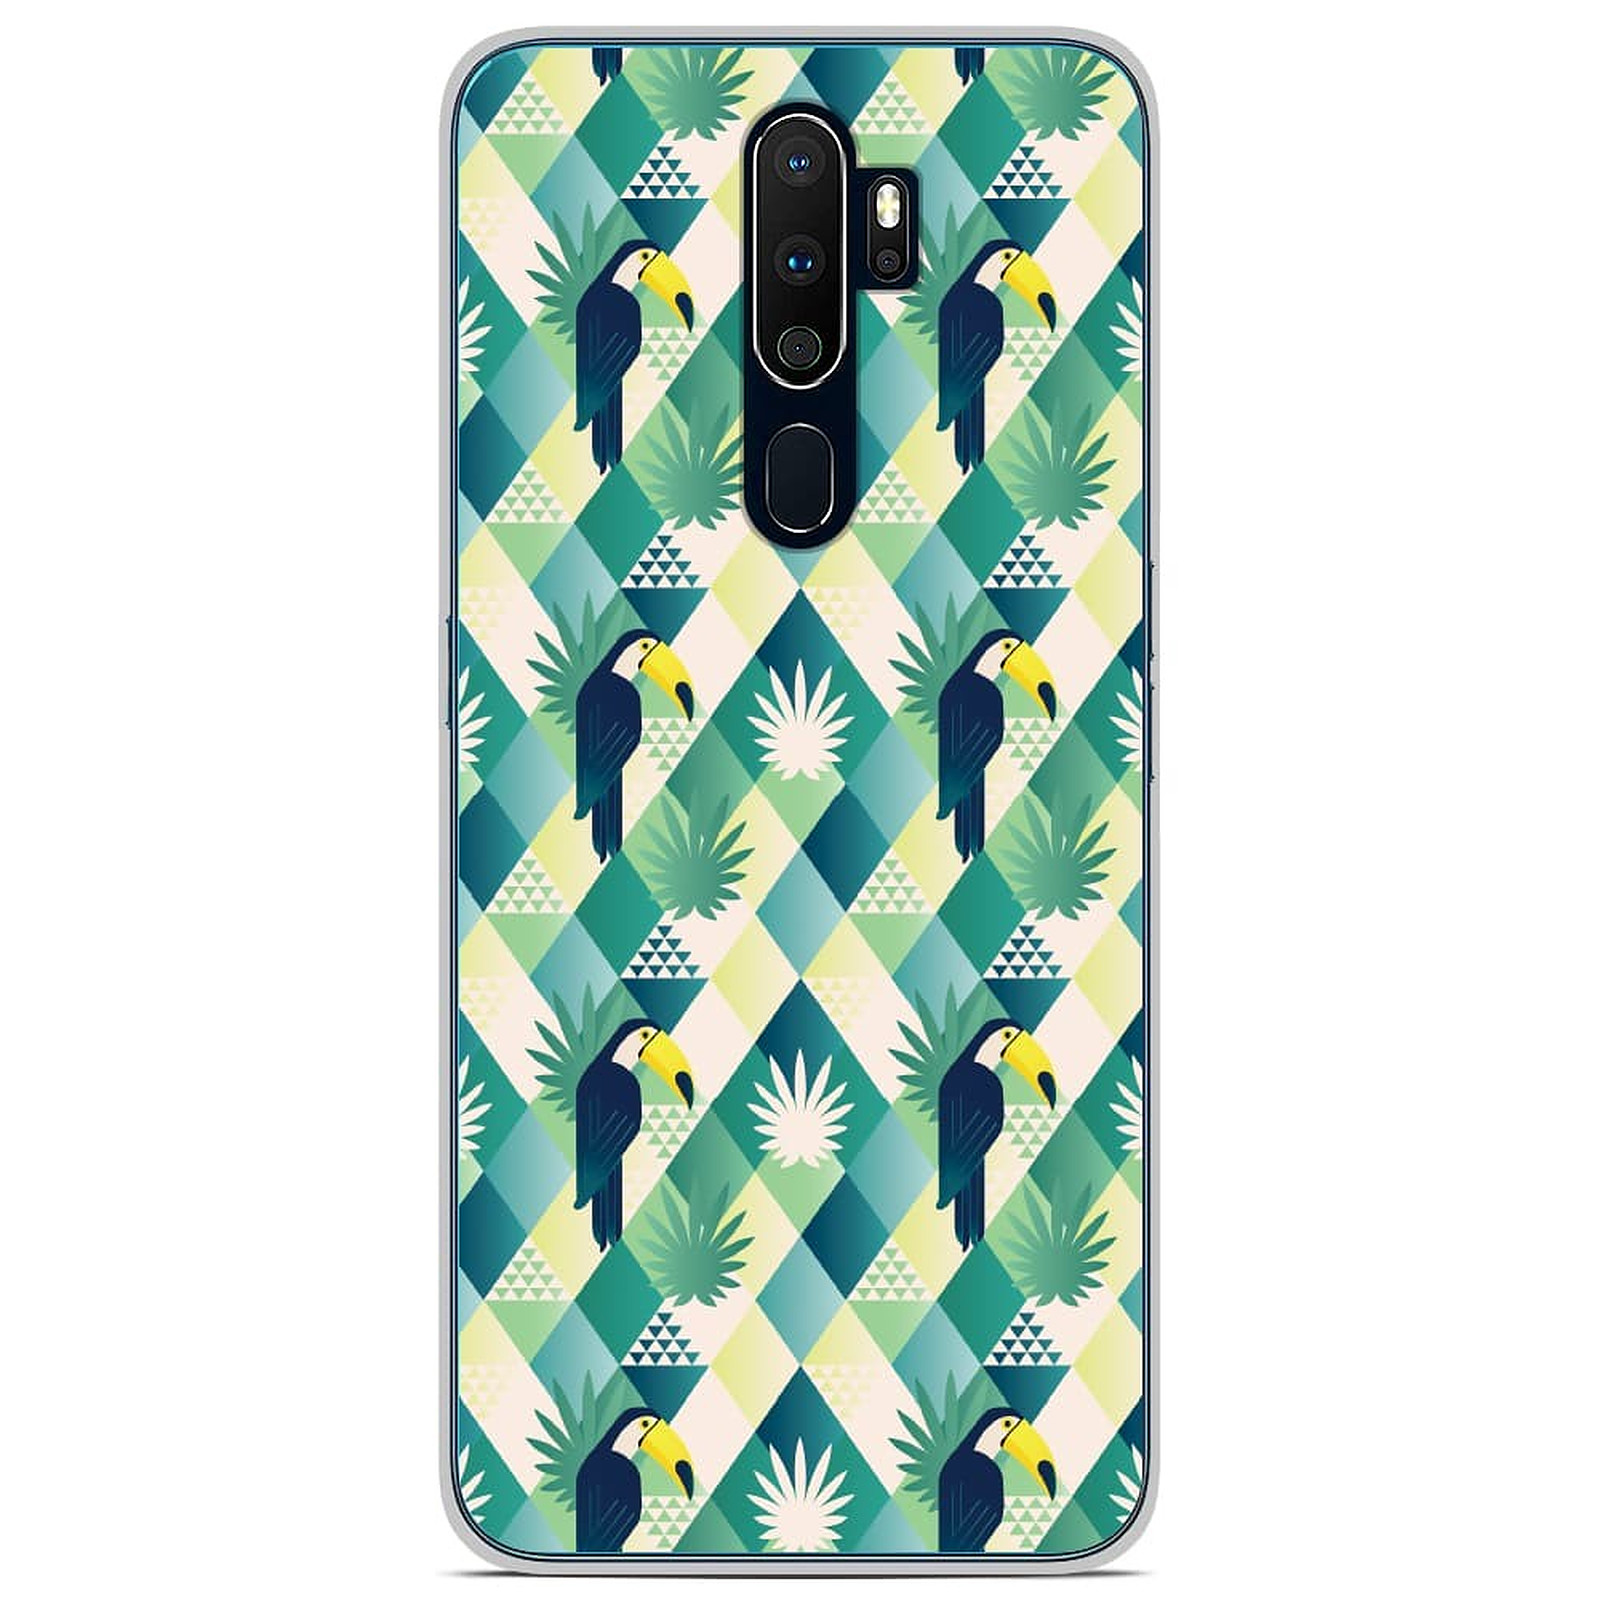 1001 Coques Coque silicone gel Oppo A9 2020 motif Toucan losange - Coque telephone 1001Coques